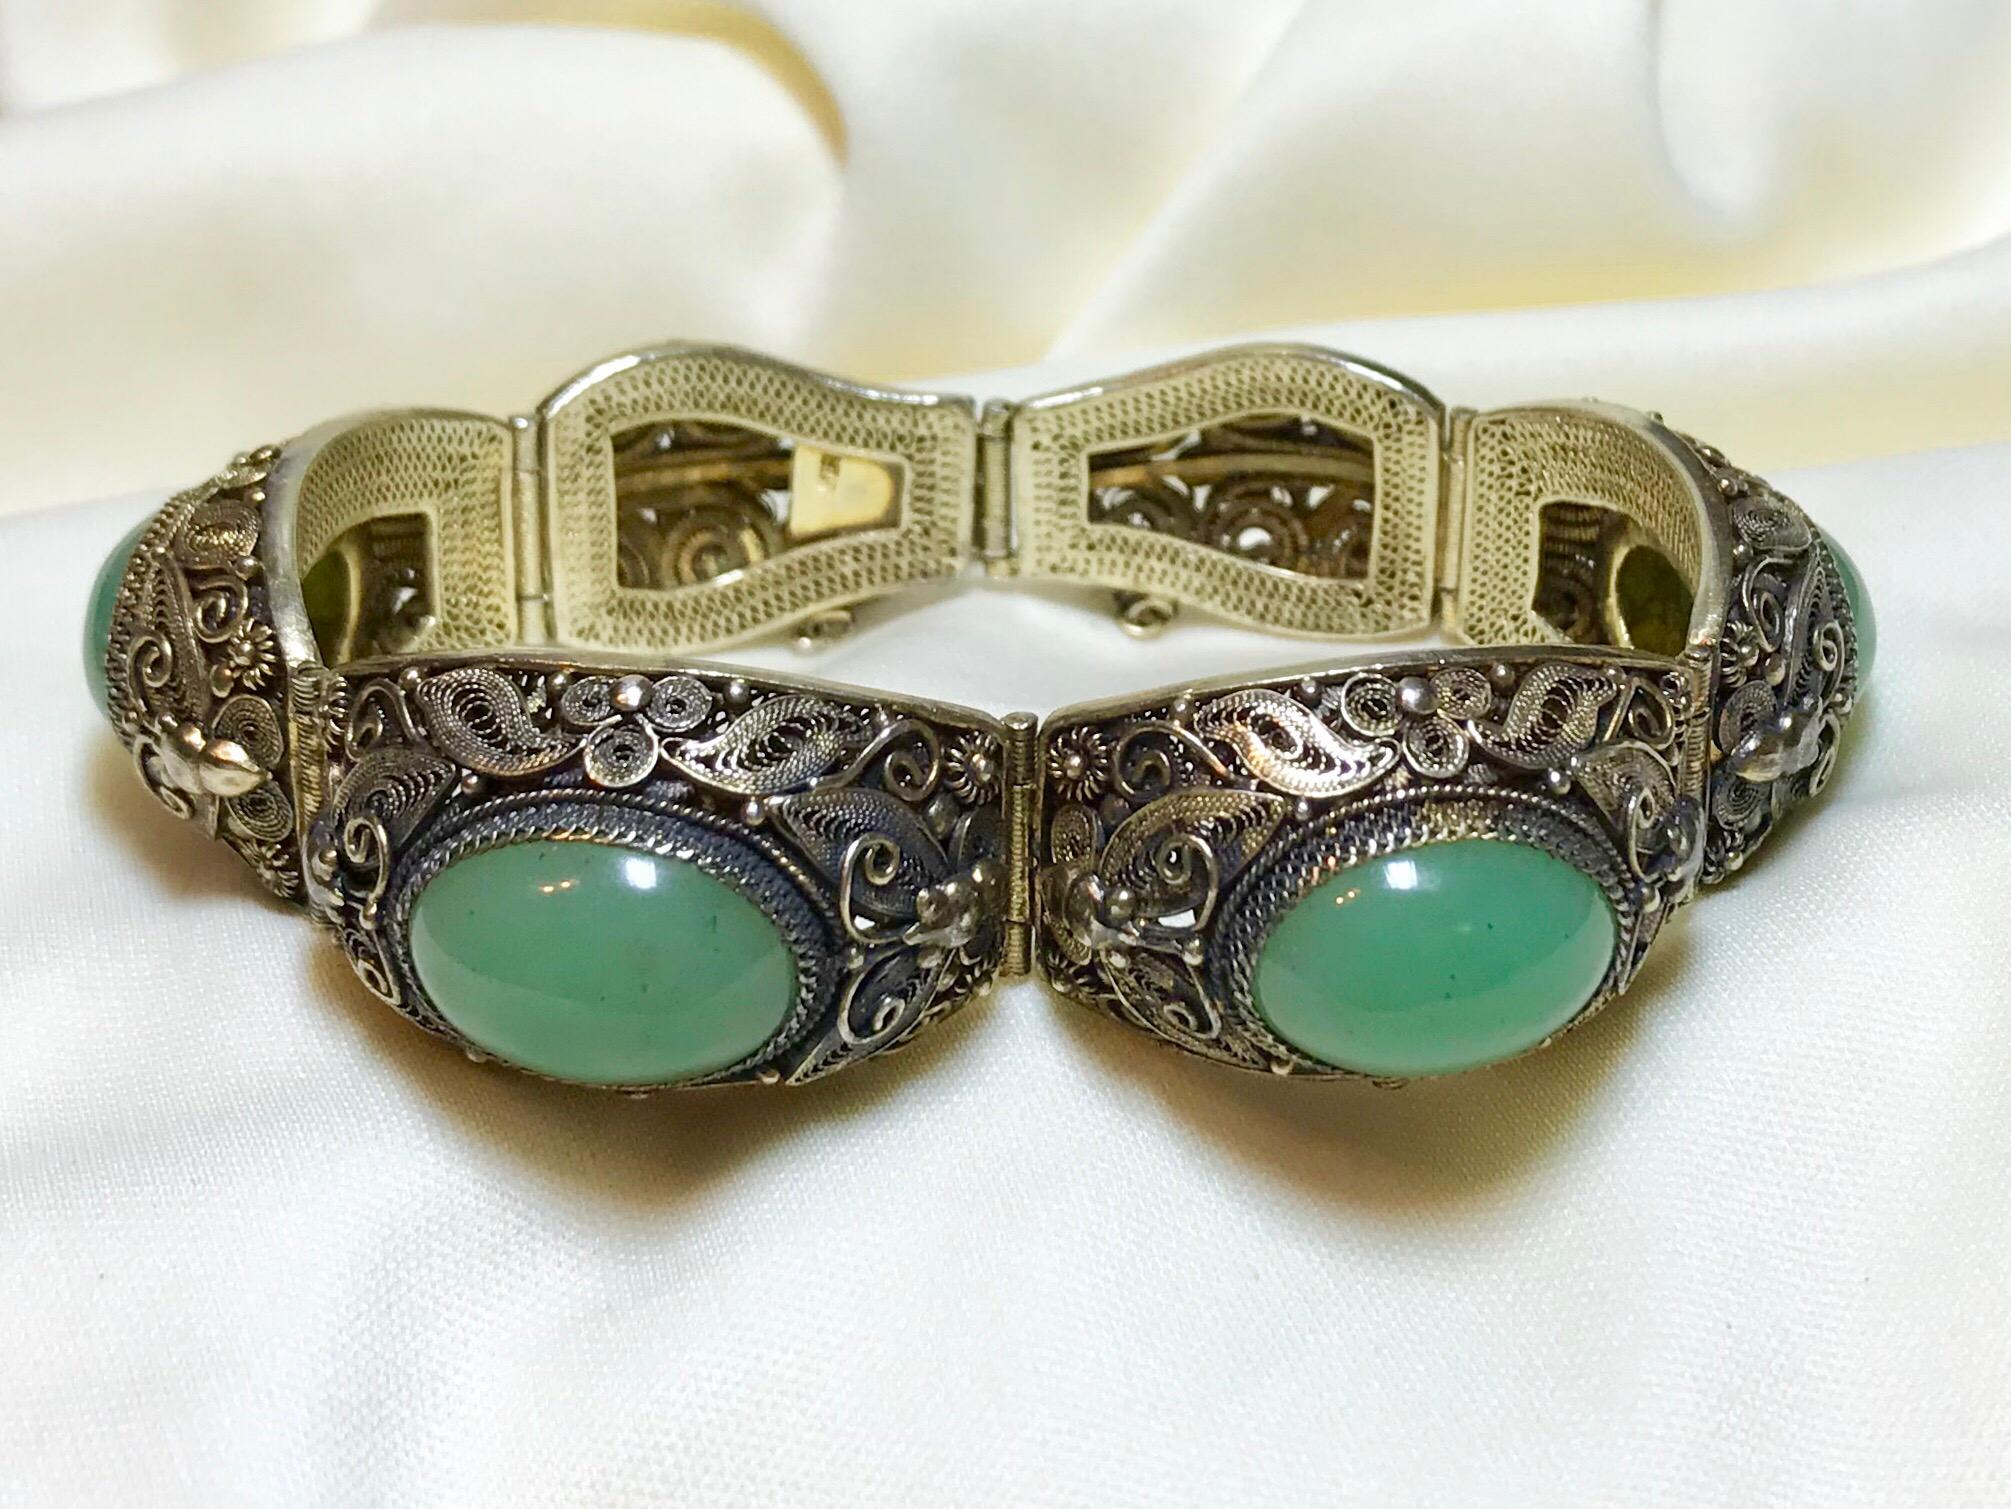 Circa 1940s to 1950s ornate gold-plated sterling silver bracelet with beautiful filigree detail and embellished with moth motifs, typical in Chinese jewelry.. It is bezel set with oval jade cabochons and measures 7.5